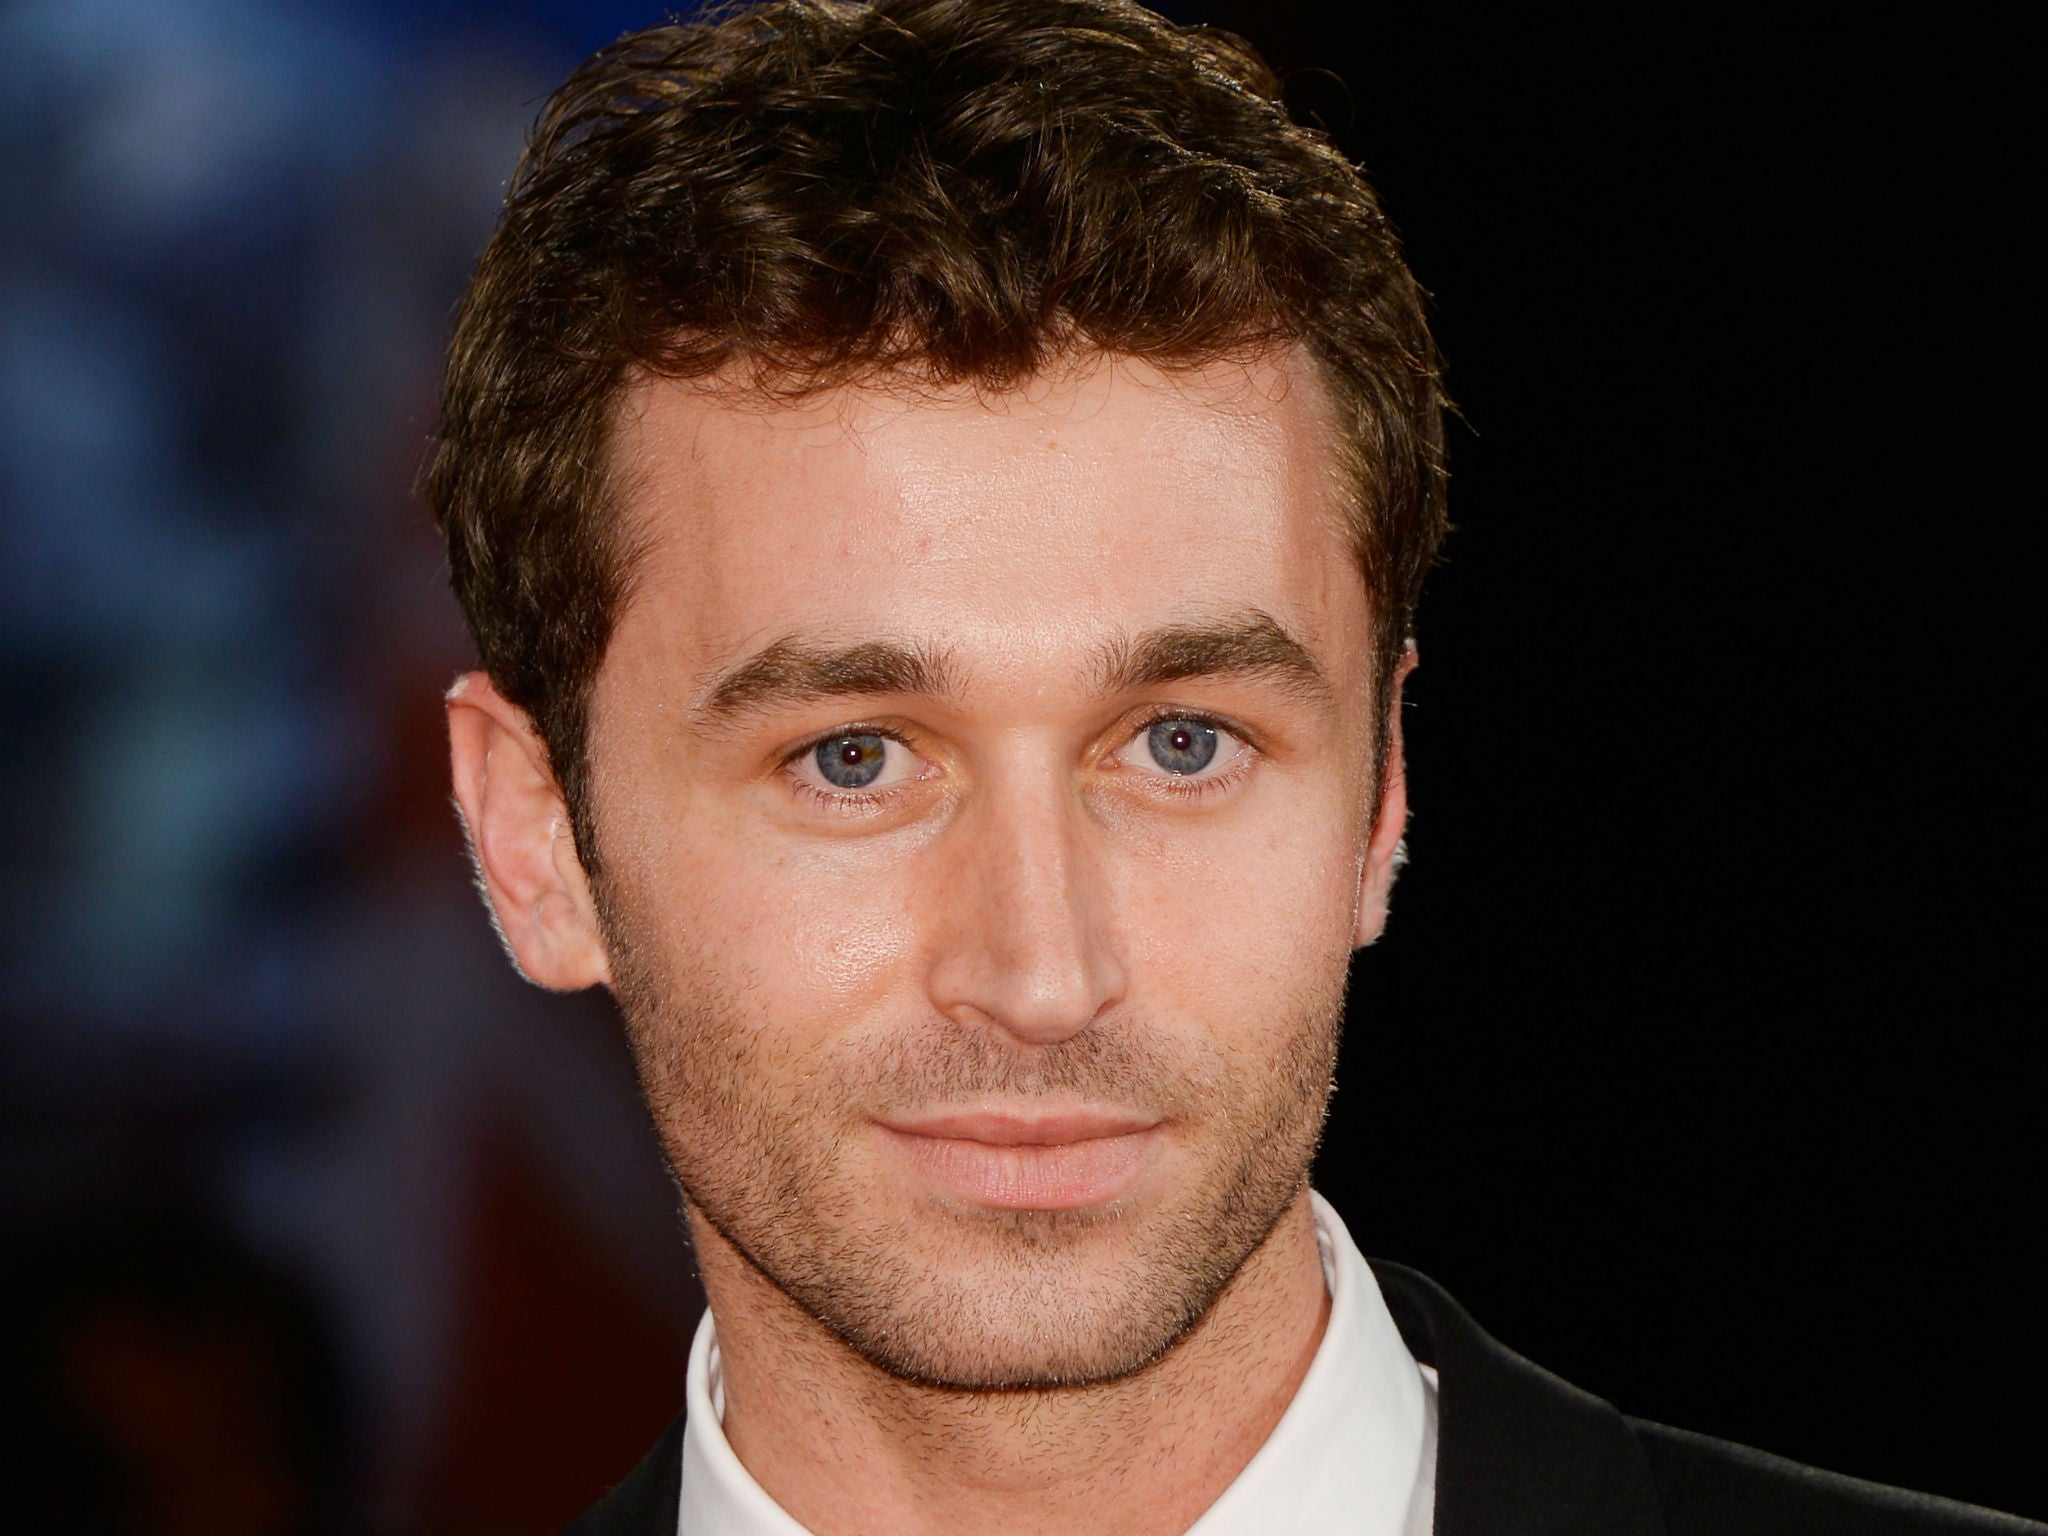 James Dean Porn Star - James Deen: Porn actor 'baffled' by rape claims and issues ...